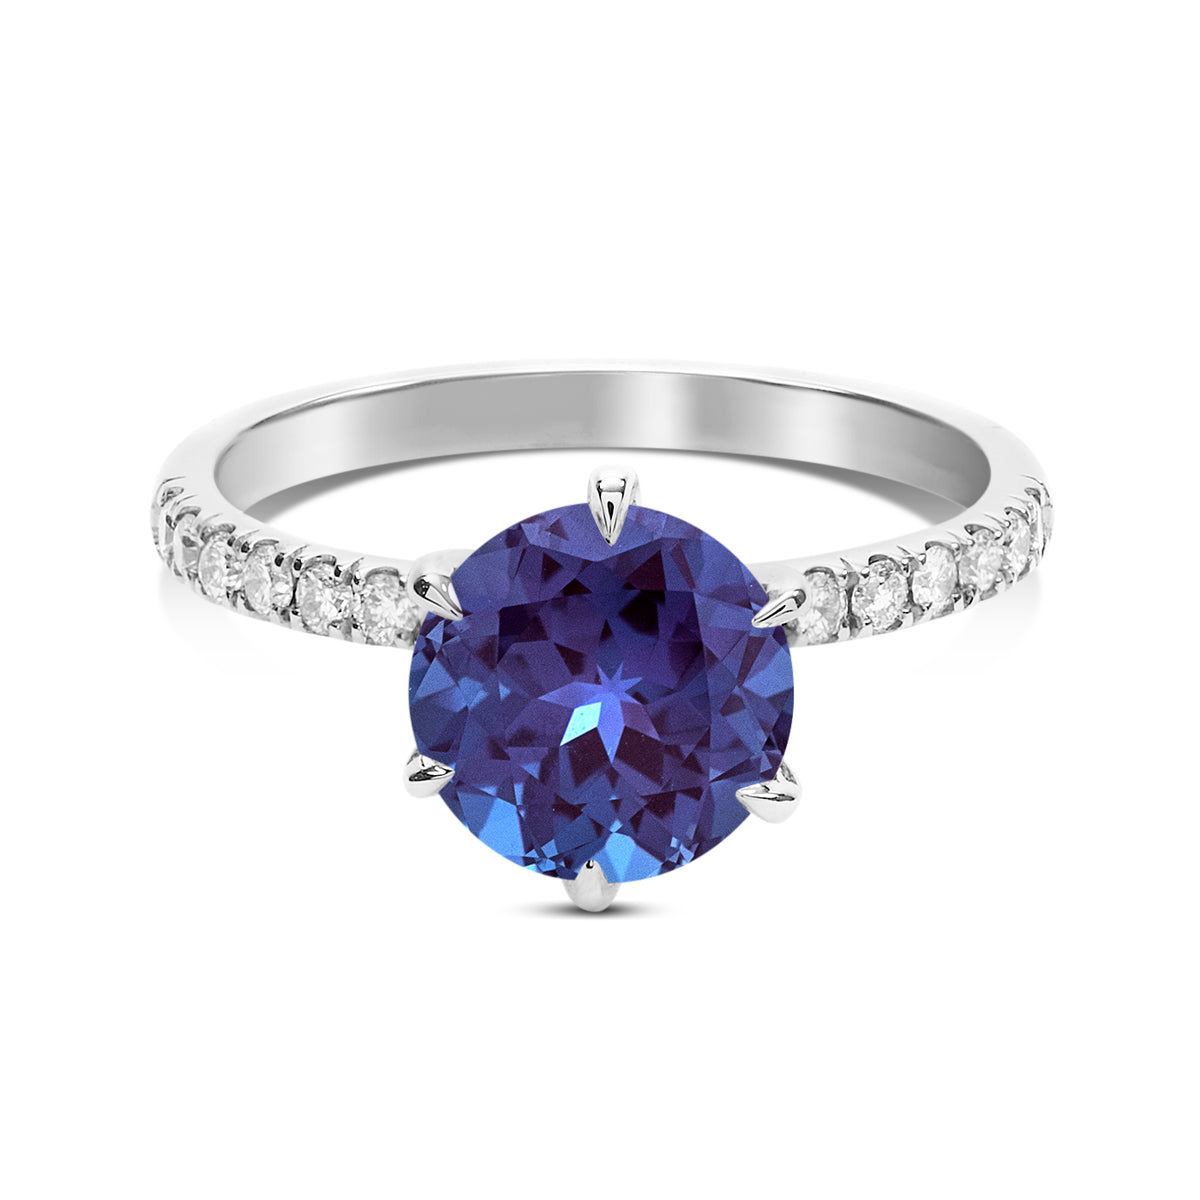 Round Cut Gem, 6 Prong Setting, Half-Pave Band - Fiere